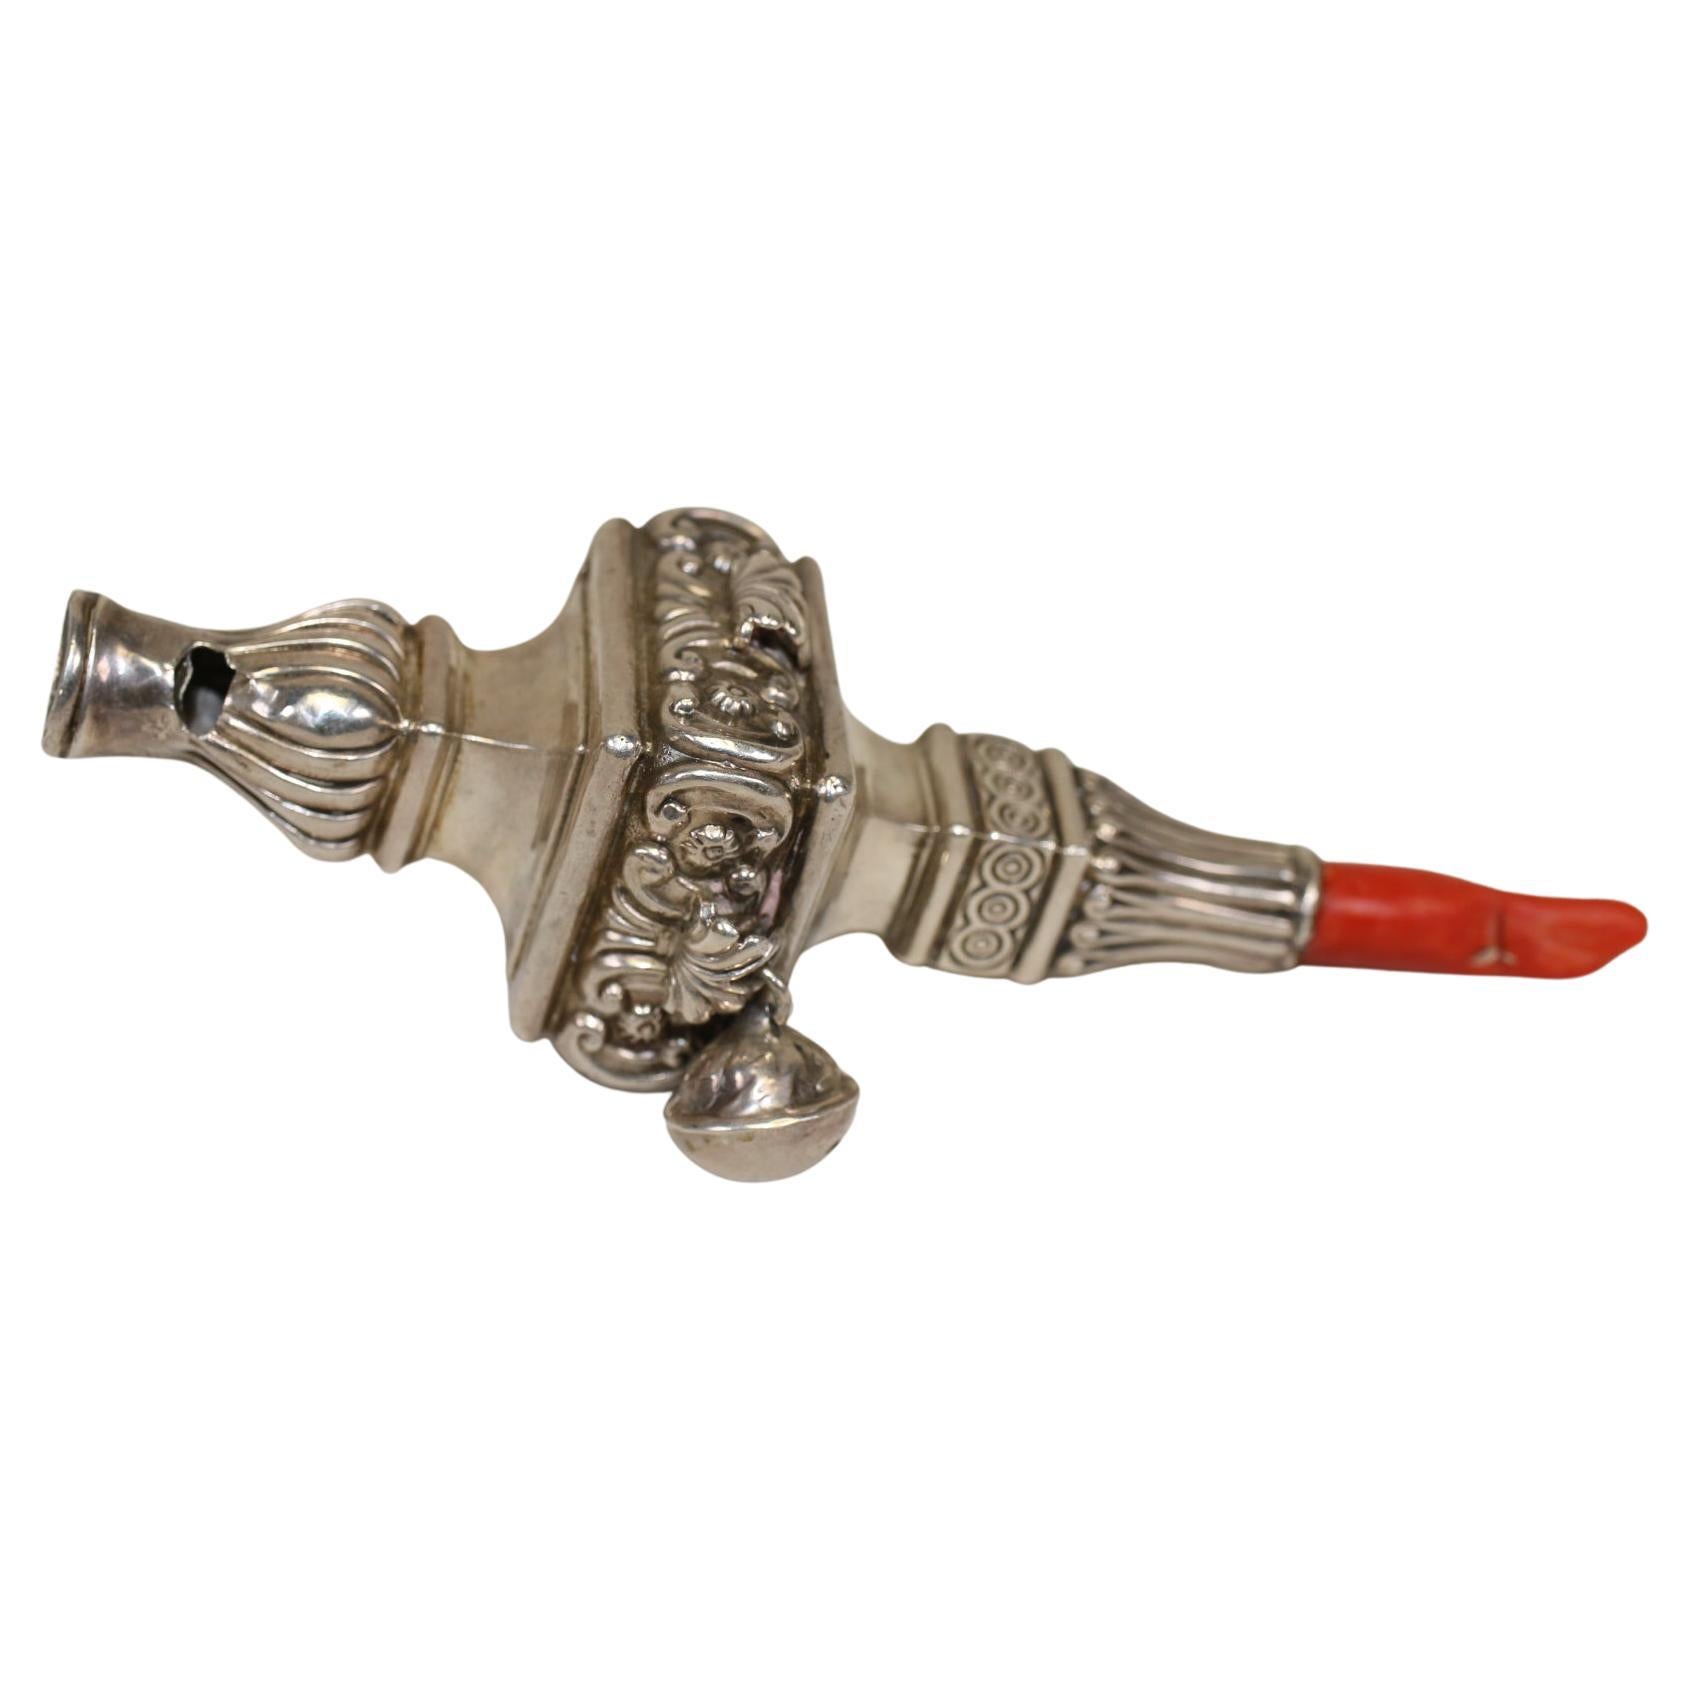 SILVER children's rattle 1900 English made Silver Rattle with Red Coral, 1900 For Sale